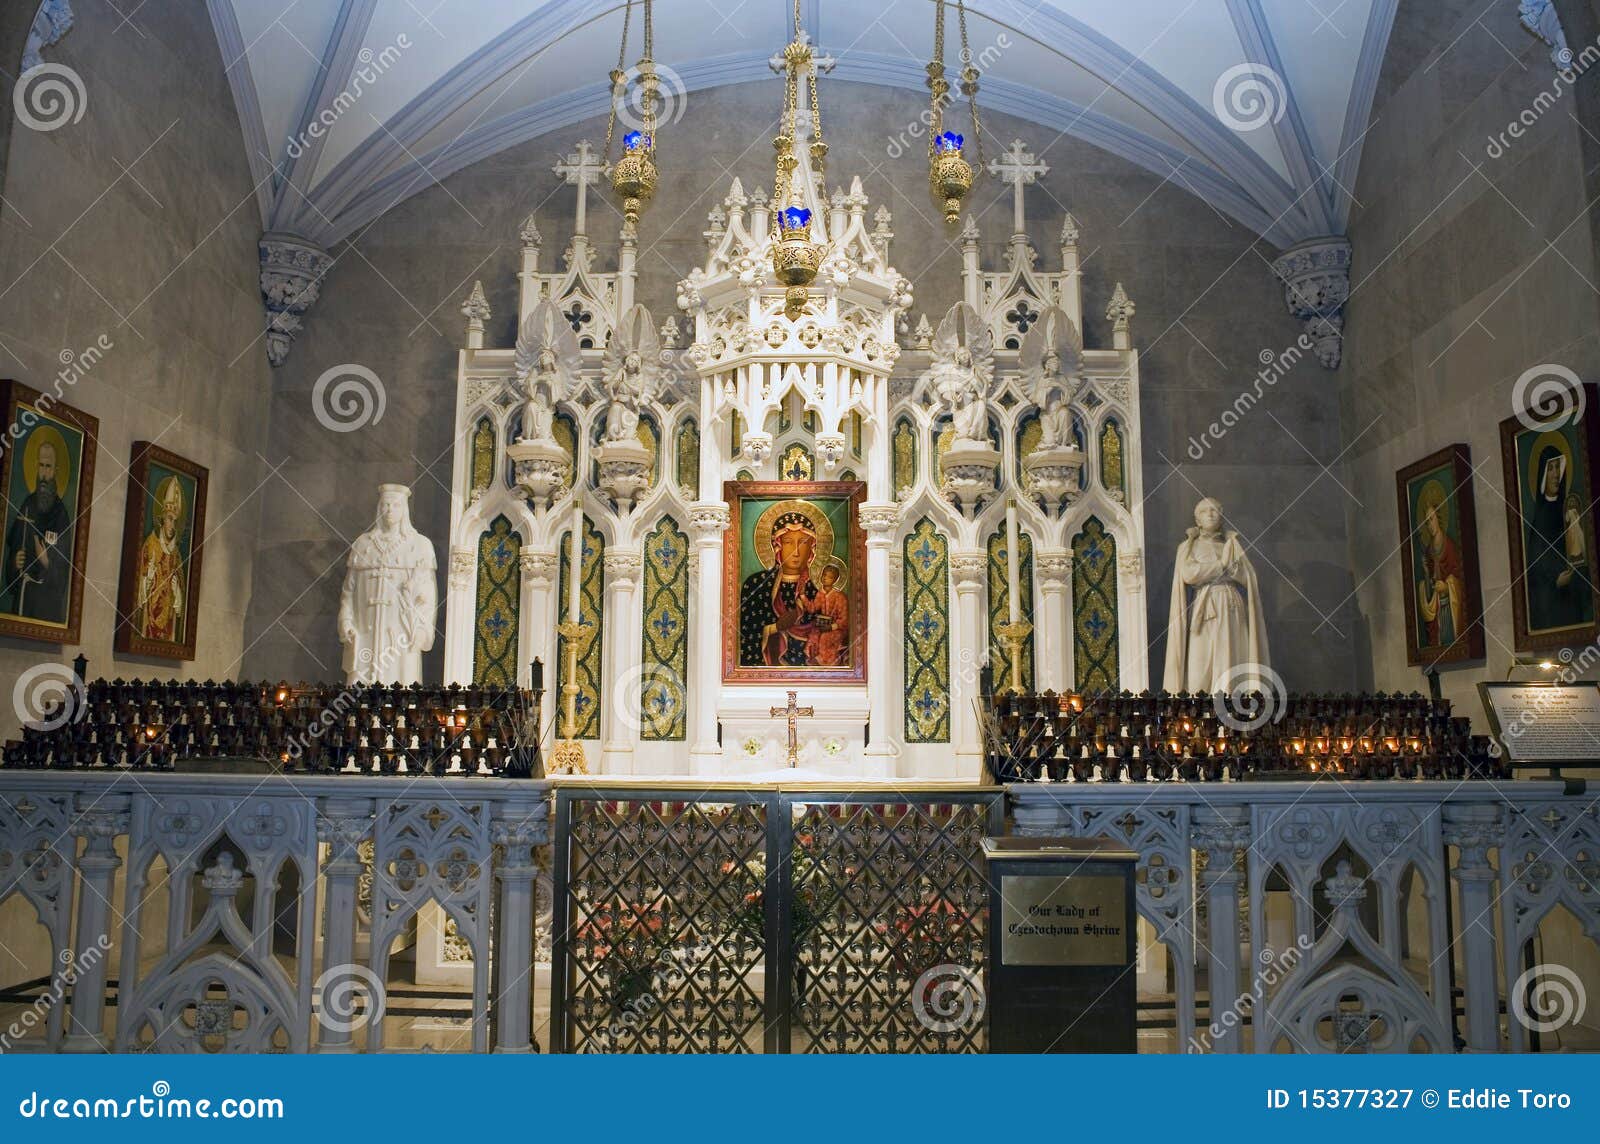 our-lady-of-czestochowa-shrine-editorial-photography-image-of-lady